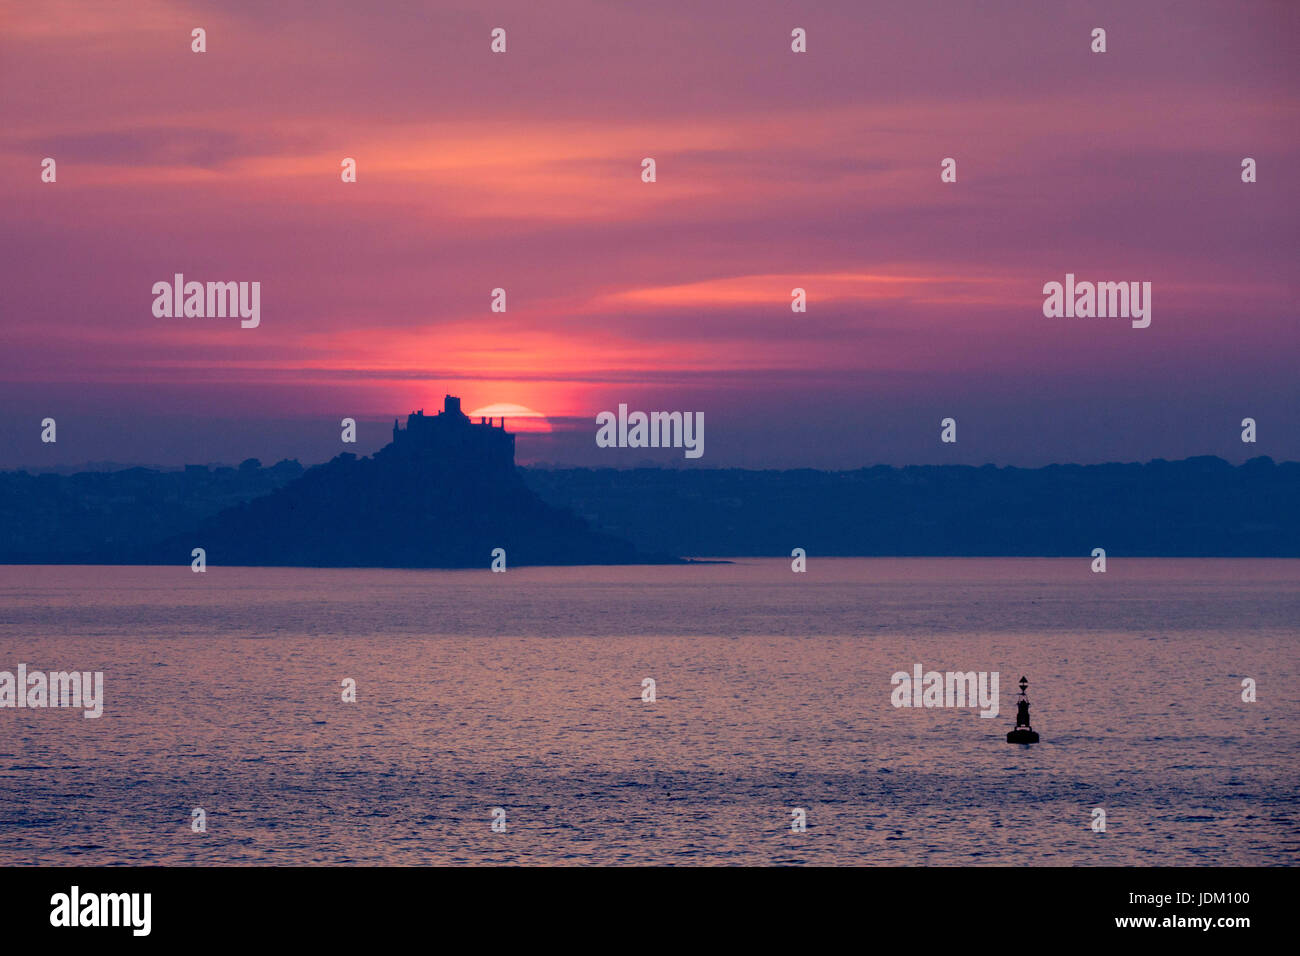 Penzance, Cornwall, UK. 21st June, 2017. A spectacular midsummer sunrise behind the castle on St Michael's Mount. Mount's Bay is a large, sweeping bay on the south west coast of Cornwall with many sandy beaches and dramatic cliff walks in either direction from Penzance. cliffs i Credit: Mike Newman/Alamy Live News Stock Photo